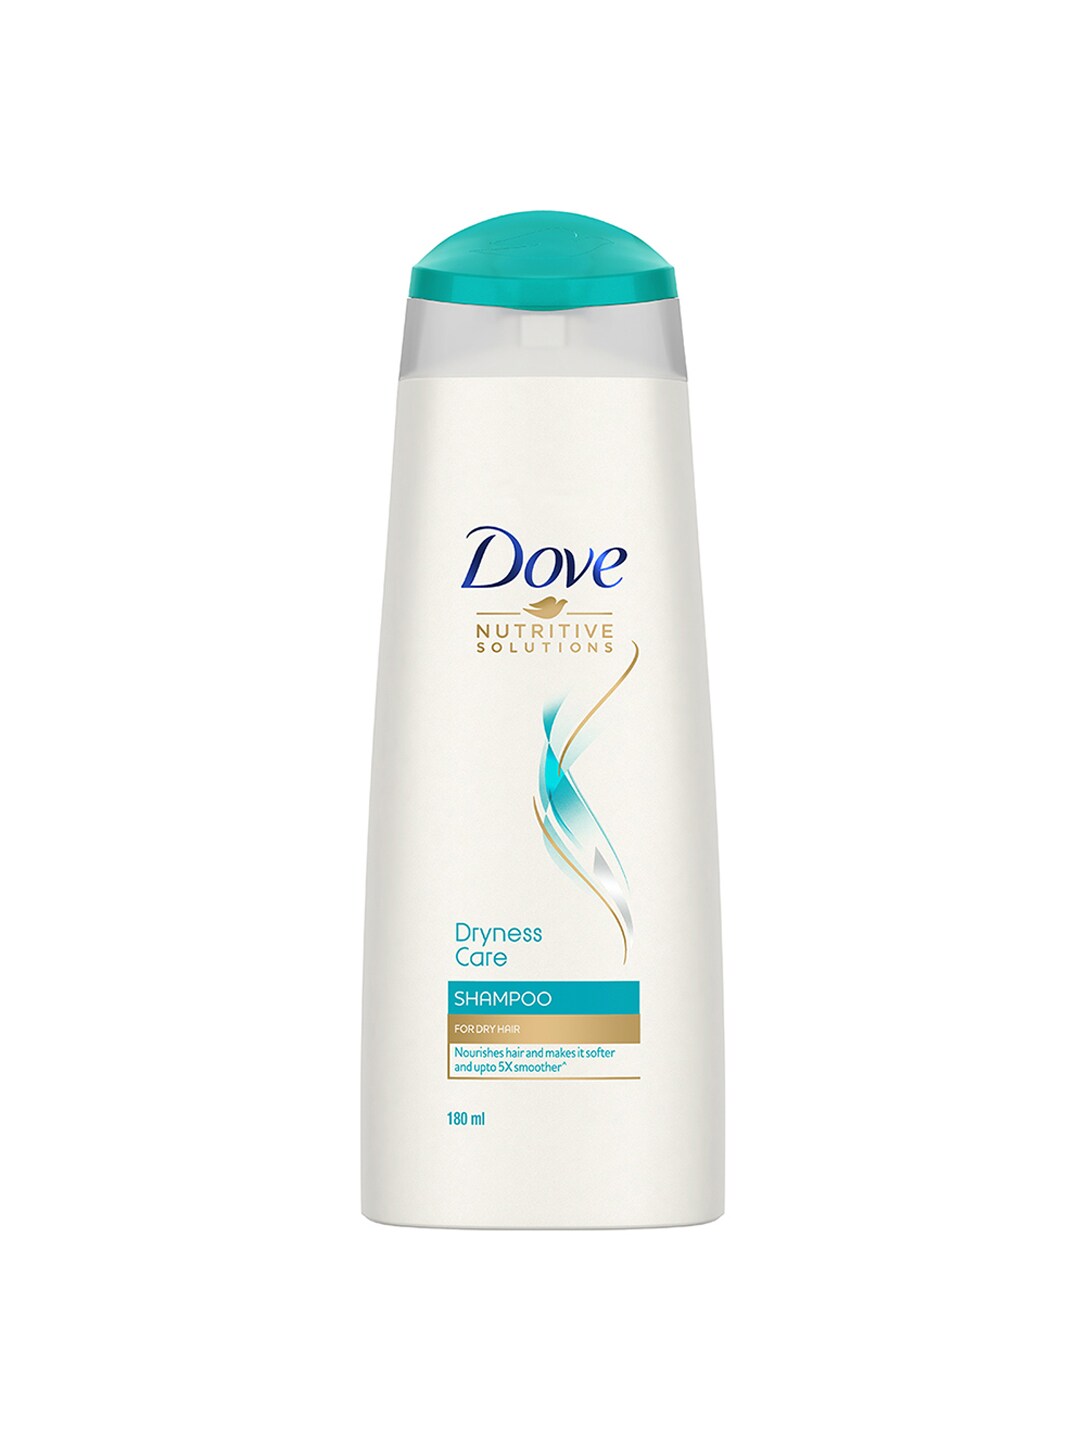 Dove Unisex Nutritive Solutions Dryness Care Shampoo 180 ml Price in India